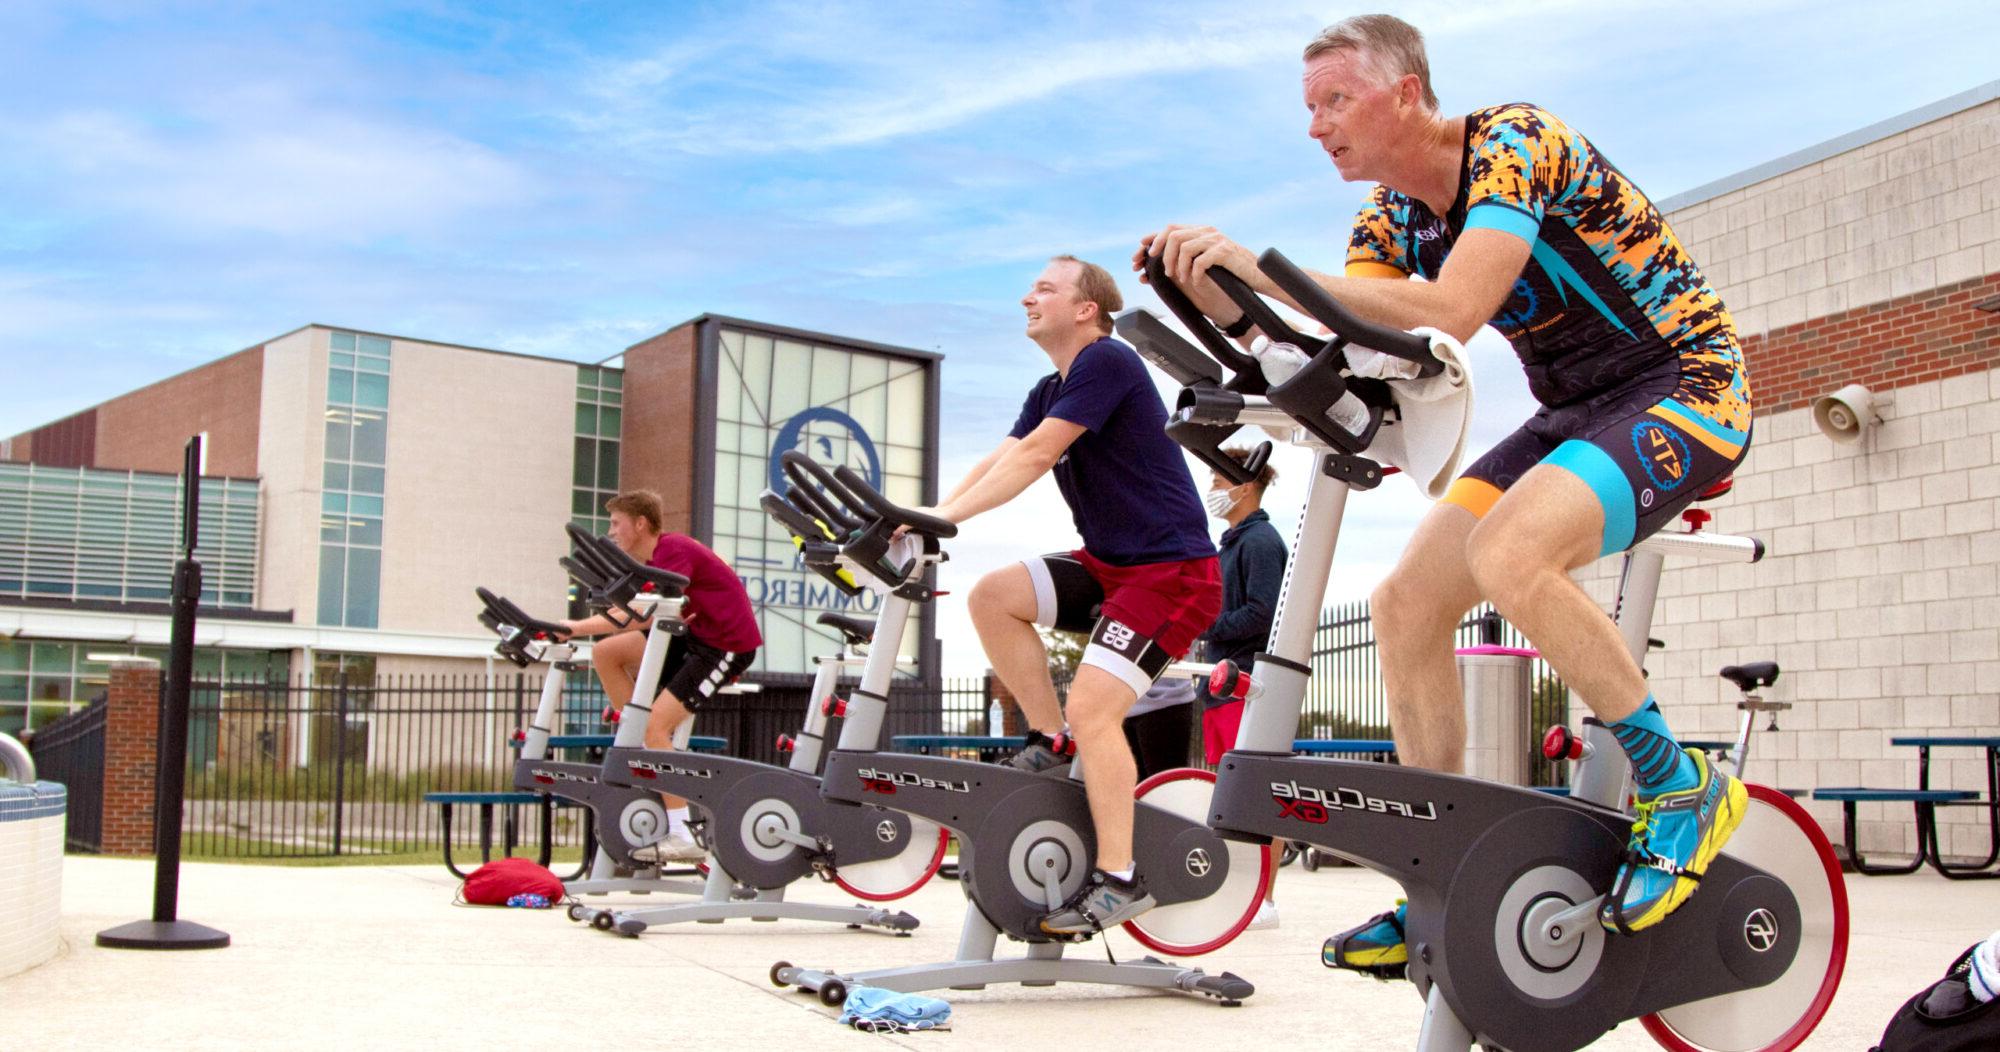 Members during a cycling class by the pool.